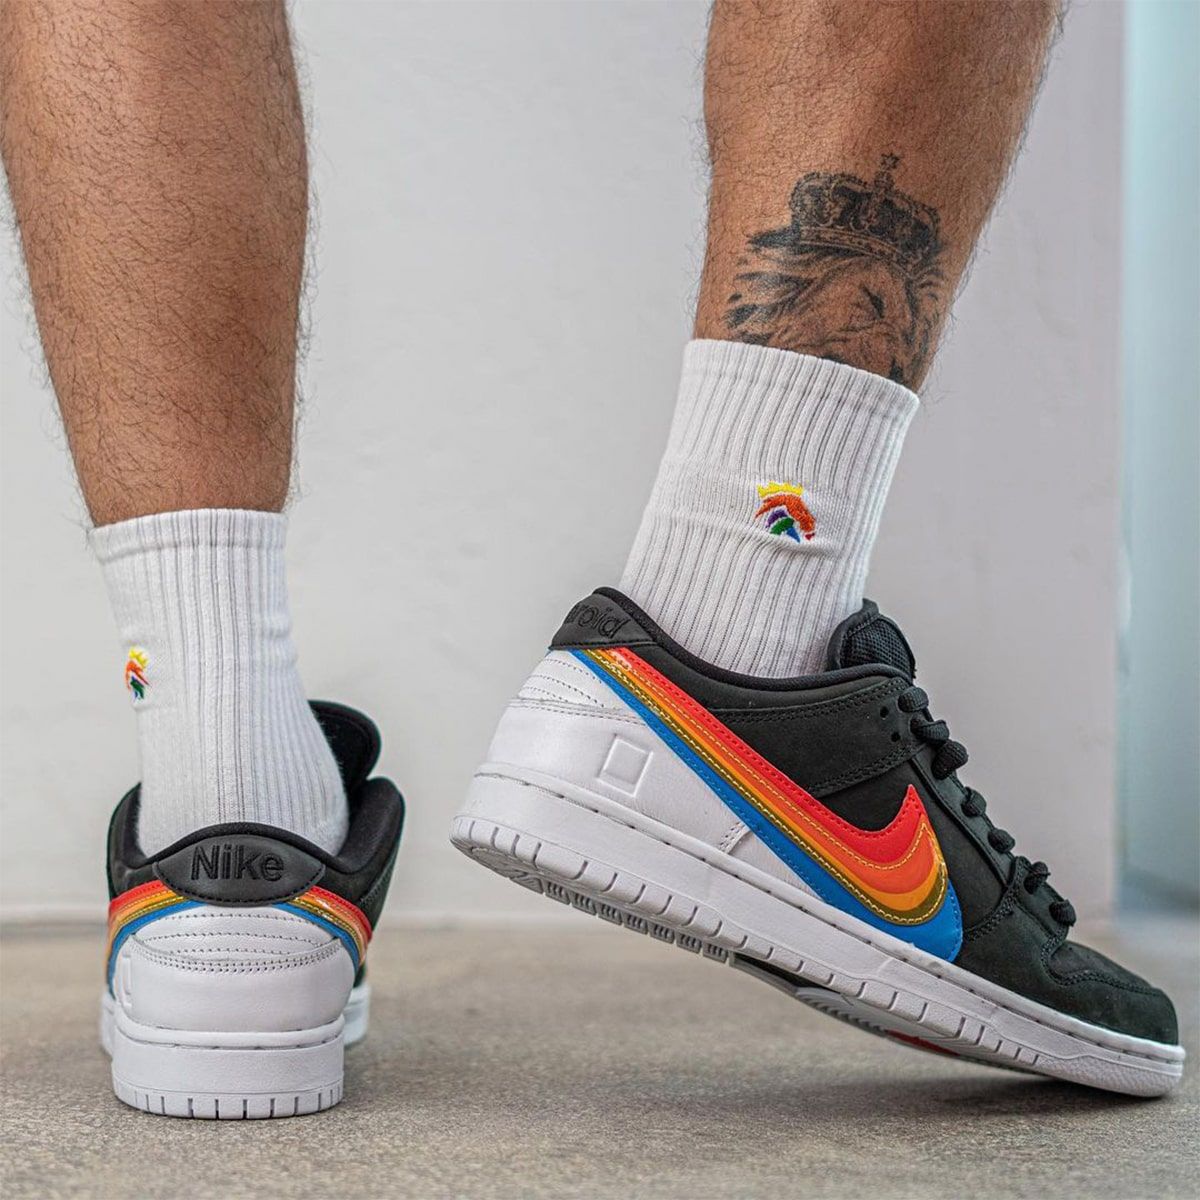 Where to Buy the Polaroid x Nike SB Dunk Low | HOUSE OF HEAT